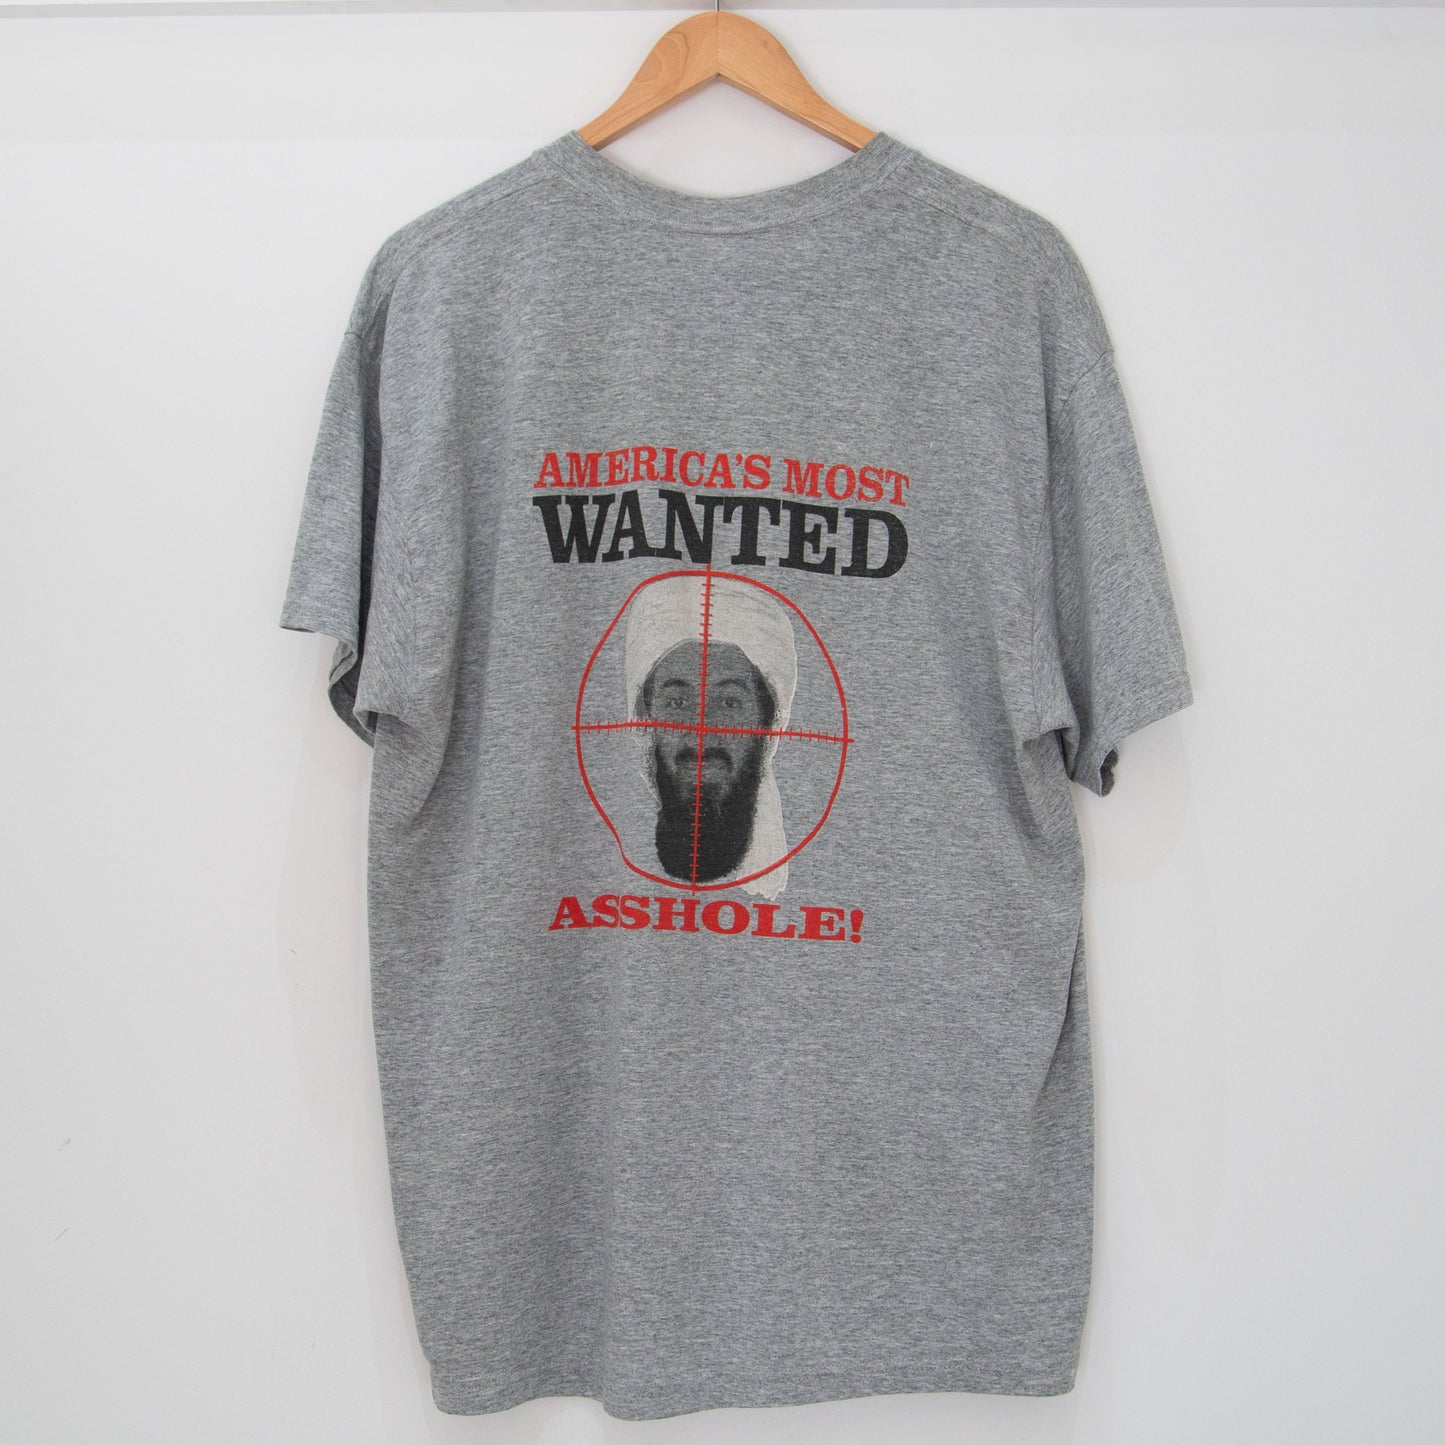 Vintage America's Most Wanted T-Shirt XL